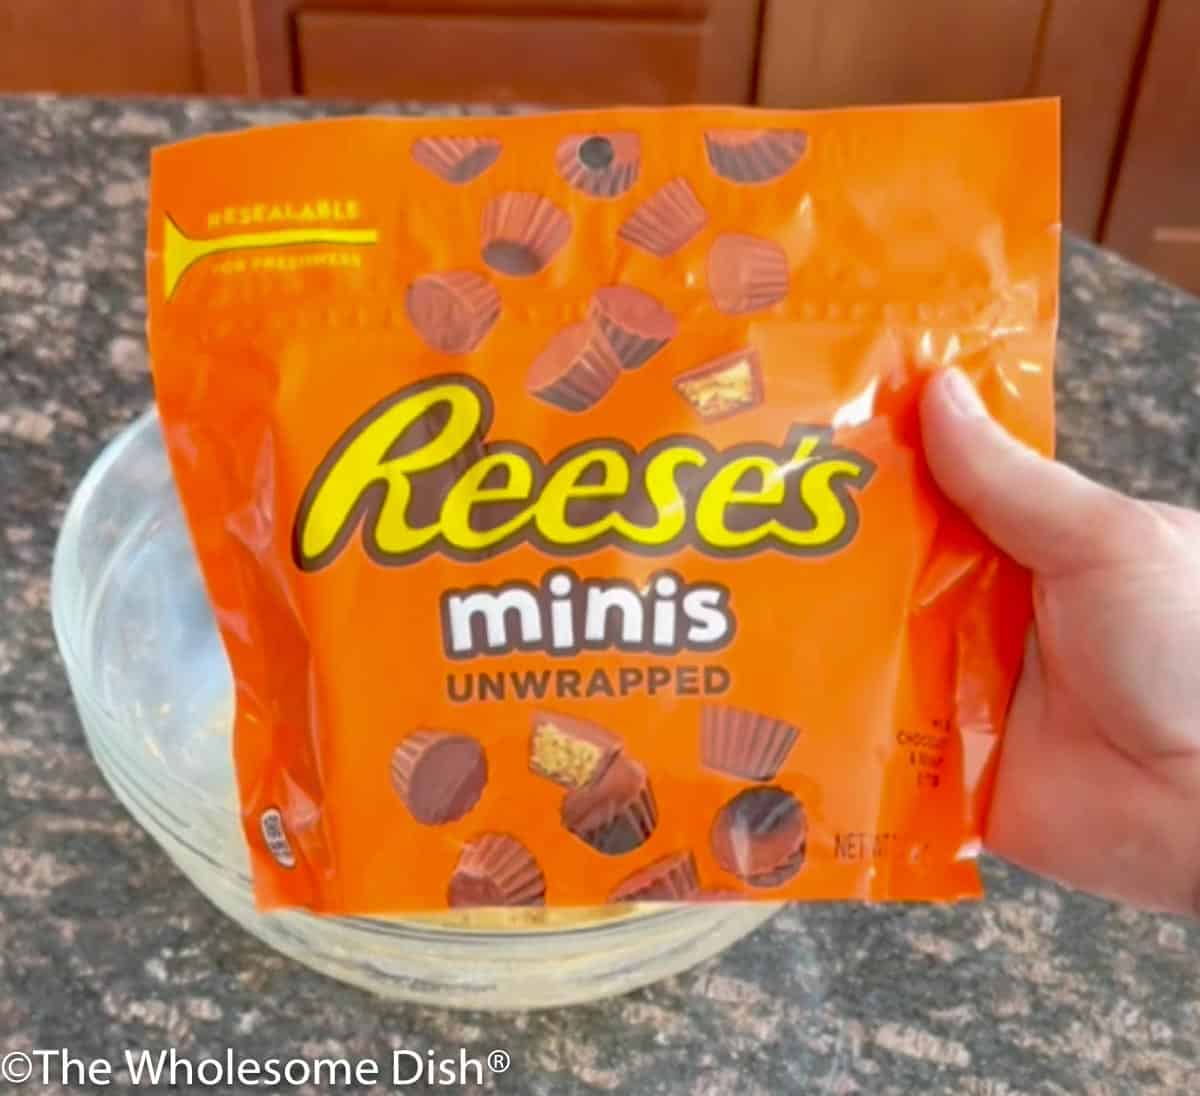 A bag of Reese's minis unwrapped peanut butter cups.